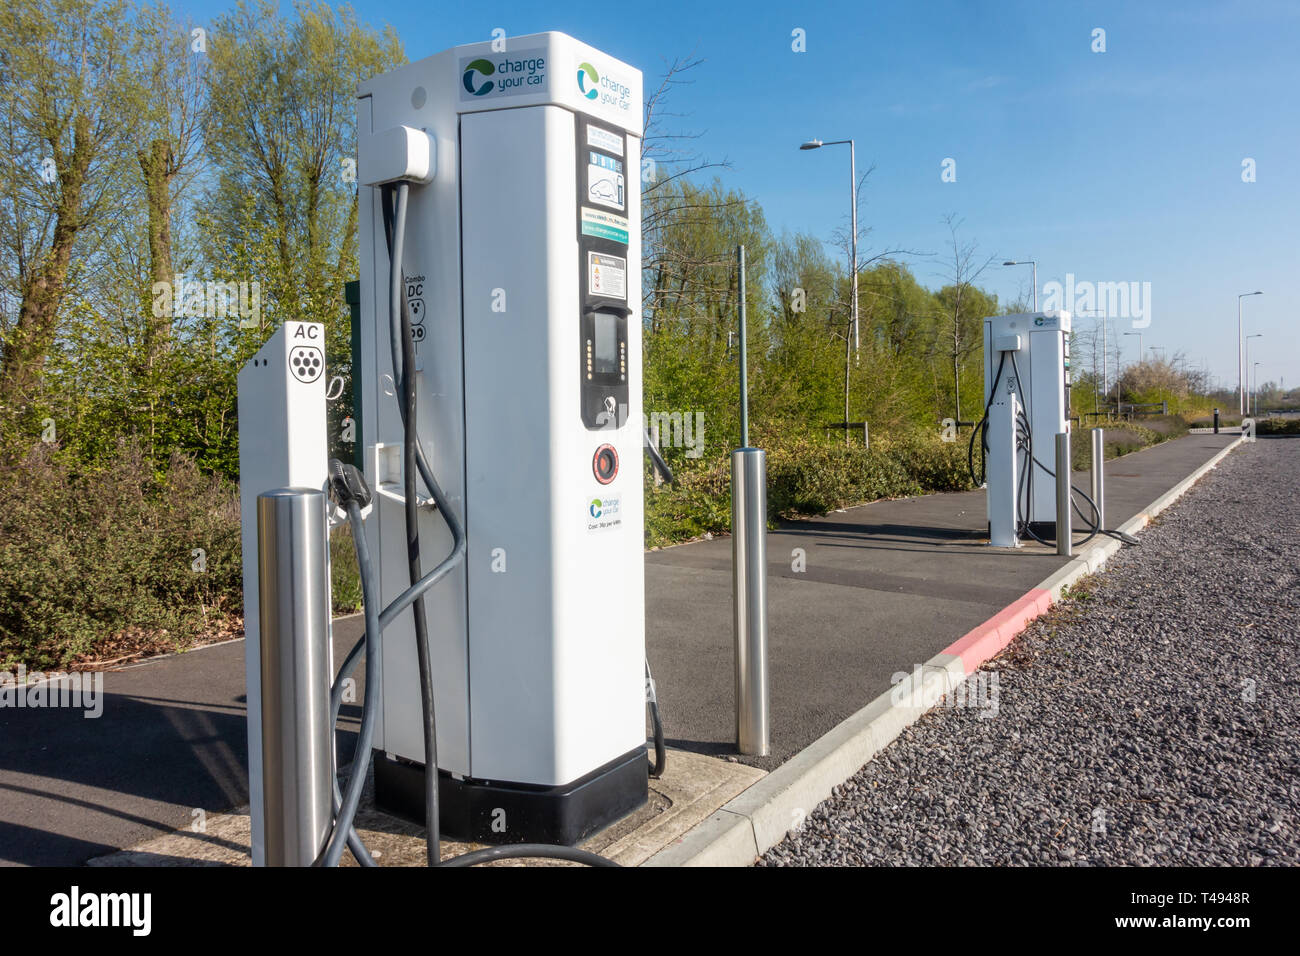 Electrical charging points to charge electric cars in Mereoak Park and Ride car park in Reading, Berkshire, UK Stock Photo